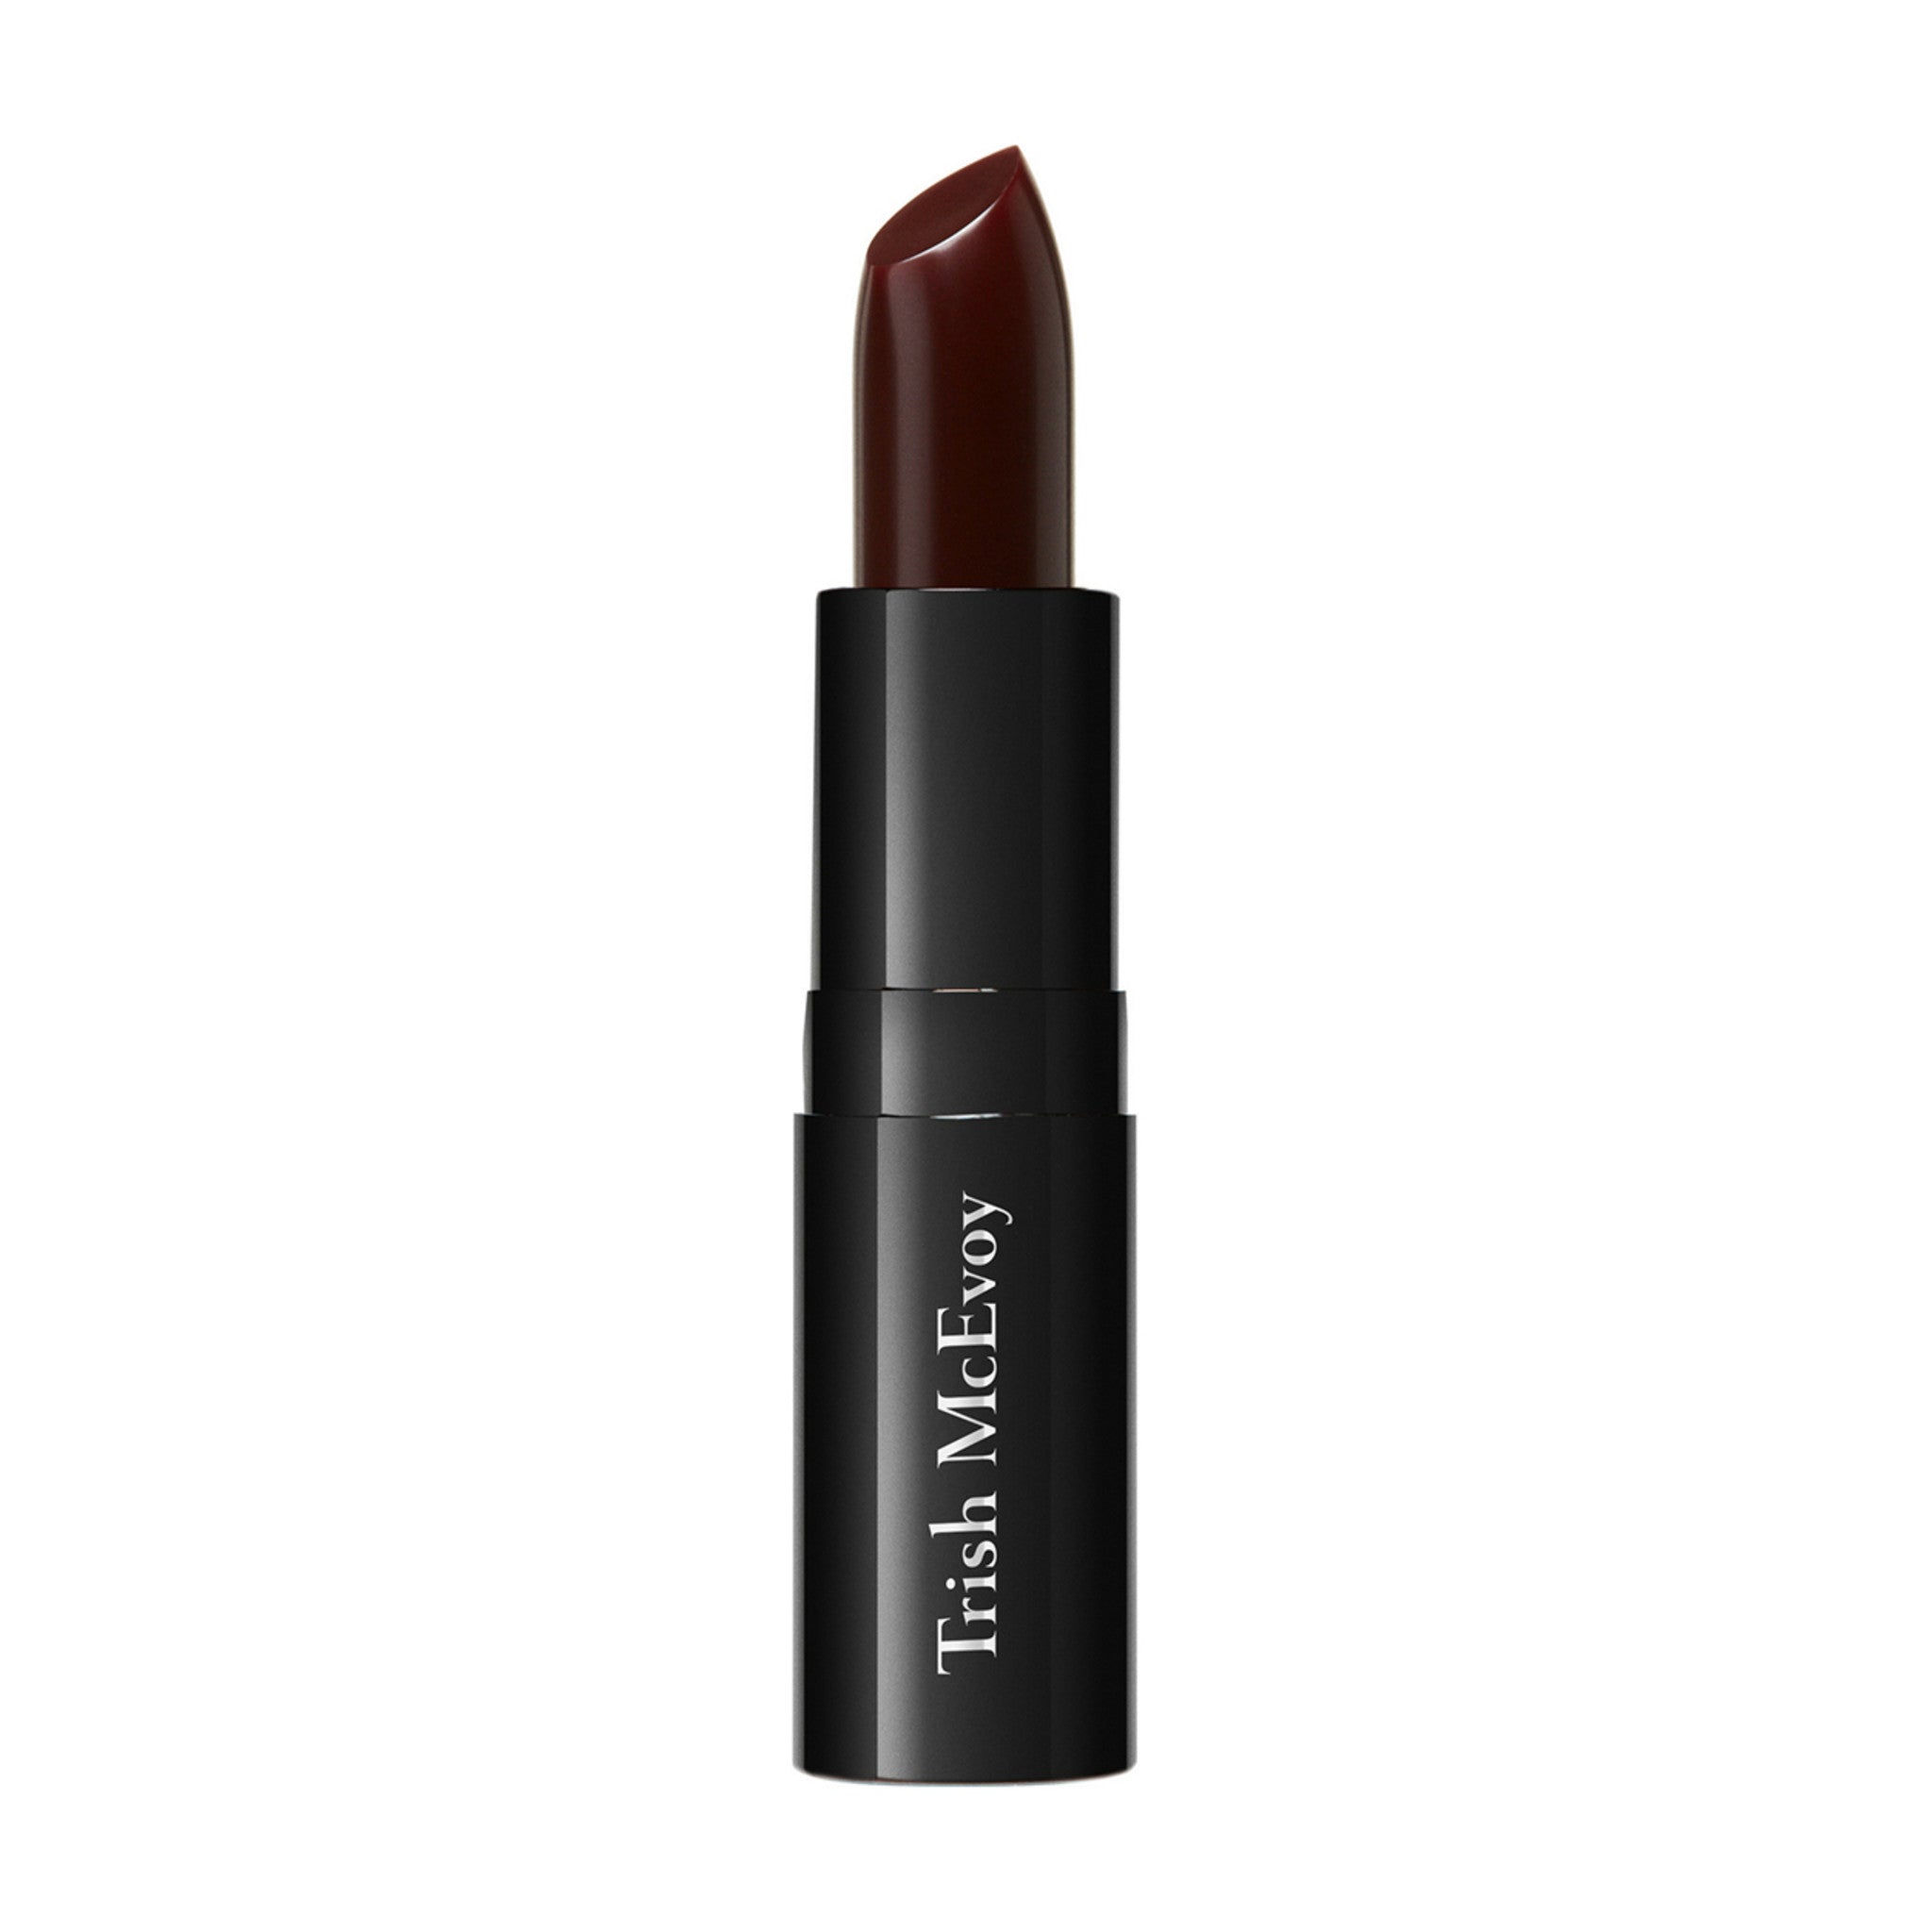 Trish McEvoy Lip Color Color/Shade variant: Mulberry (Sheer) main image. This product is in the color nude